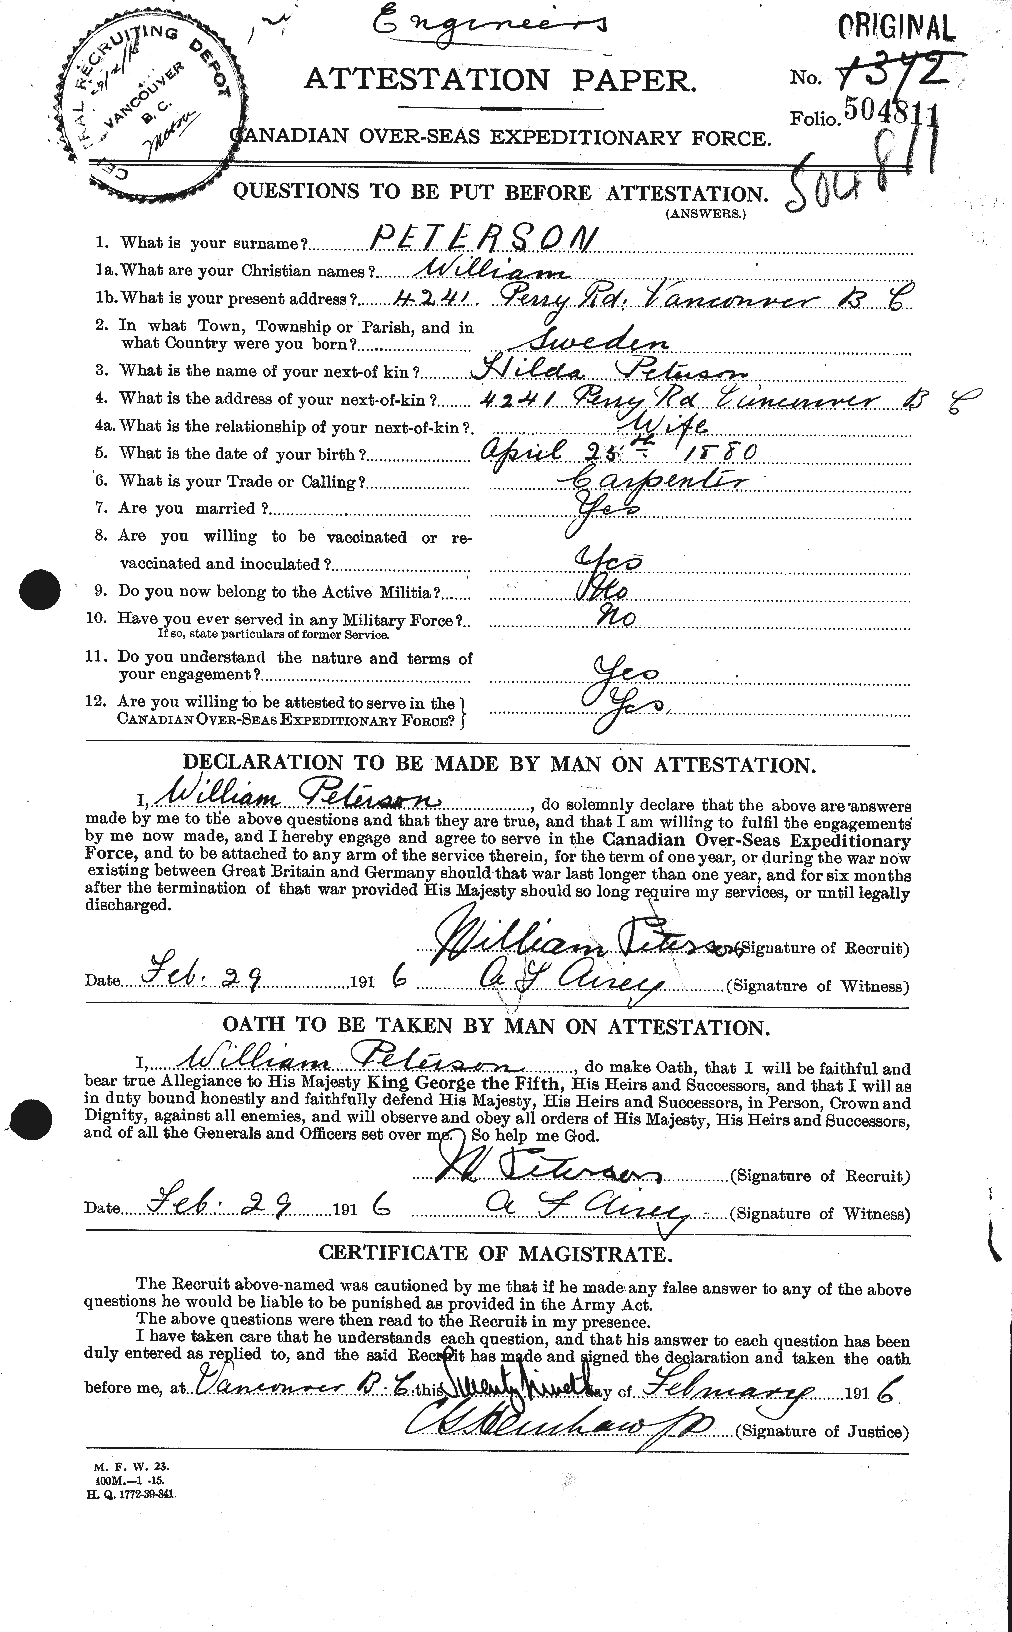 Personnel Records of the First World War - CEF 576077a